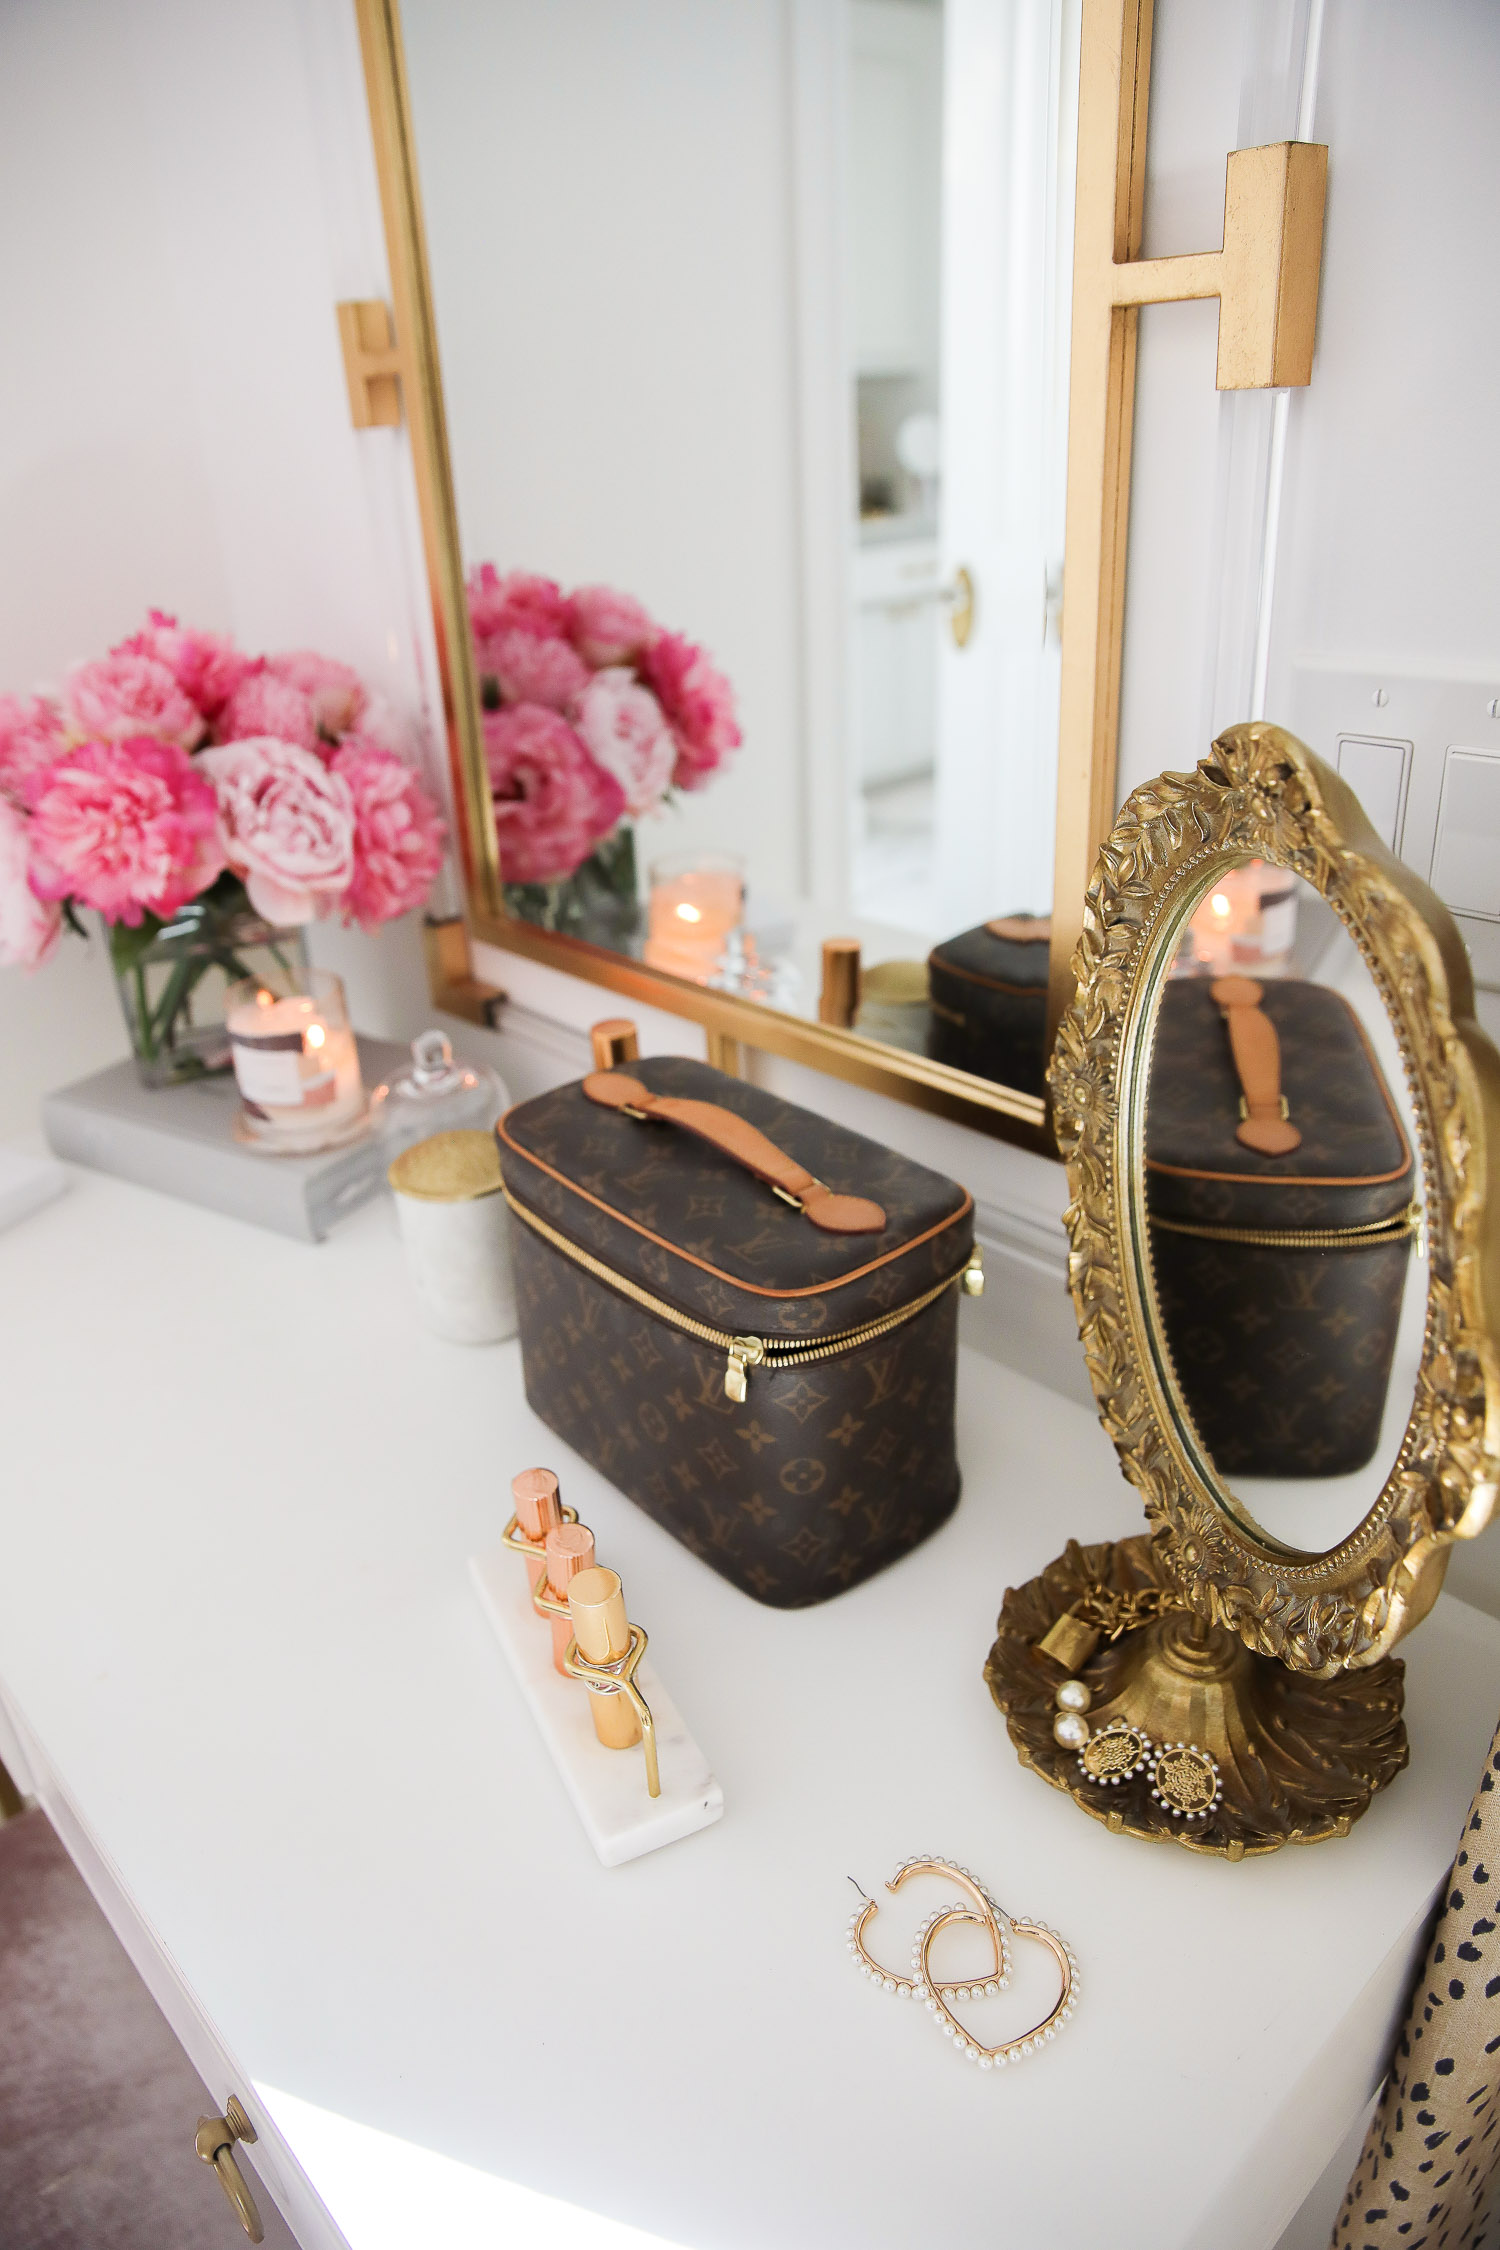  Work From Home Outfits by popular US fashion blog, The Sweetest Thing: image of a vanity with a vase of pink roses, marble and gold lipstick organizer, pearl heart shape earrings, and Louis Vuitton makeup case.